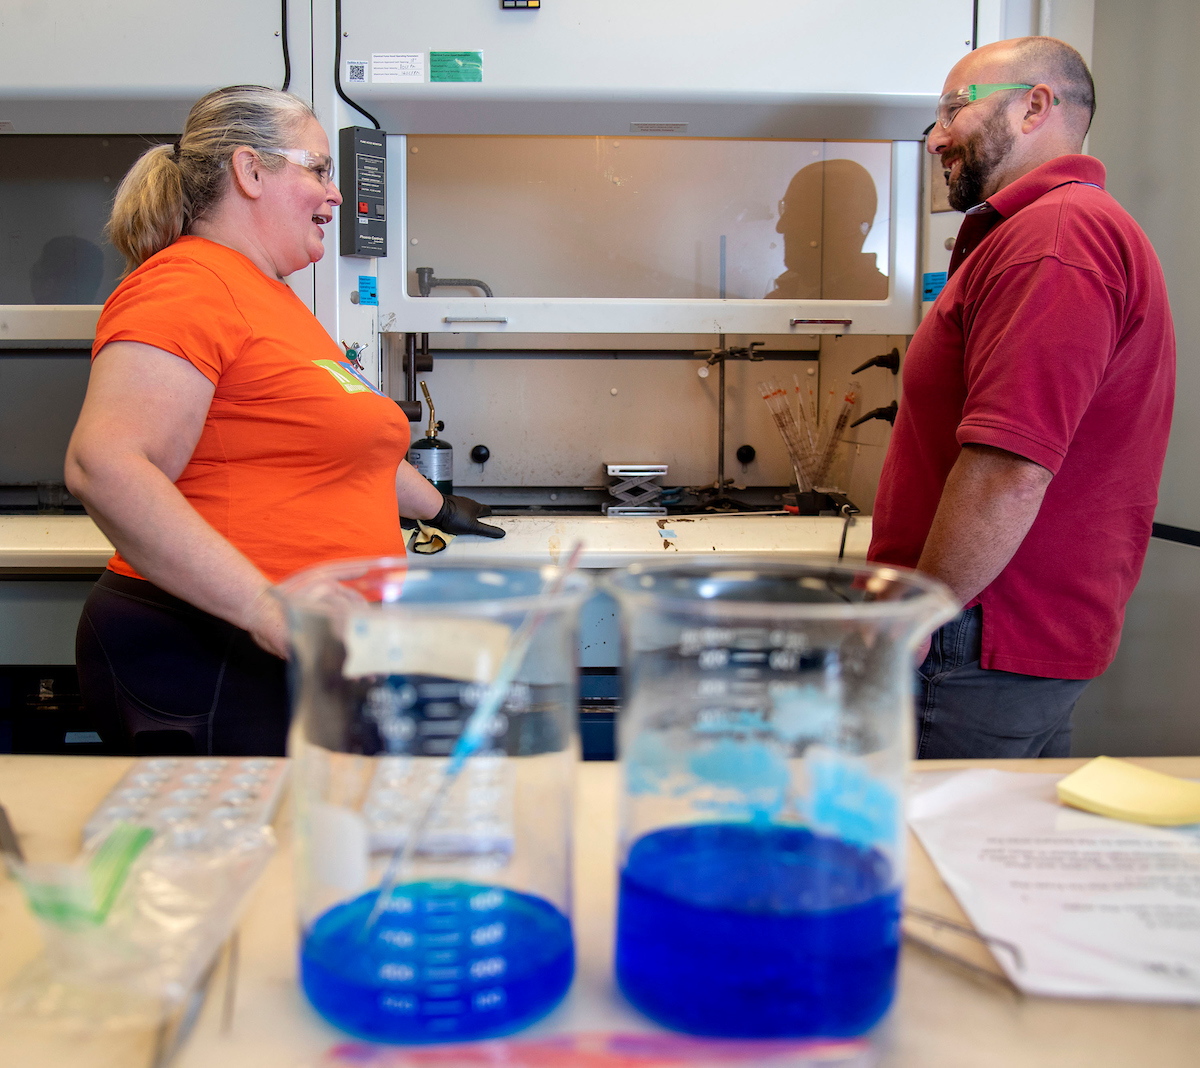 Master teacher Sherri Conn&amp;nbsp;Rukes, left, of Libertyville High School, chats with a teacher about materials science&amp;nbsp;at the Kiln House in&amp;nbsp;Urbana, Ill. on Tuesday, June 13, 2022.